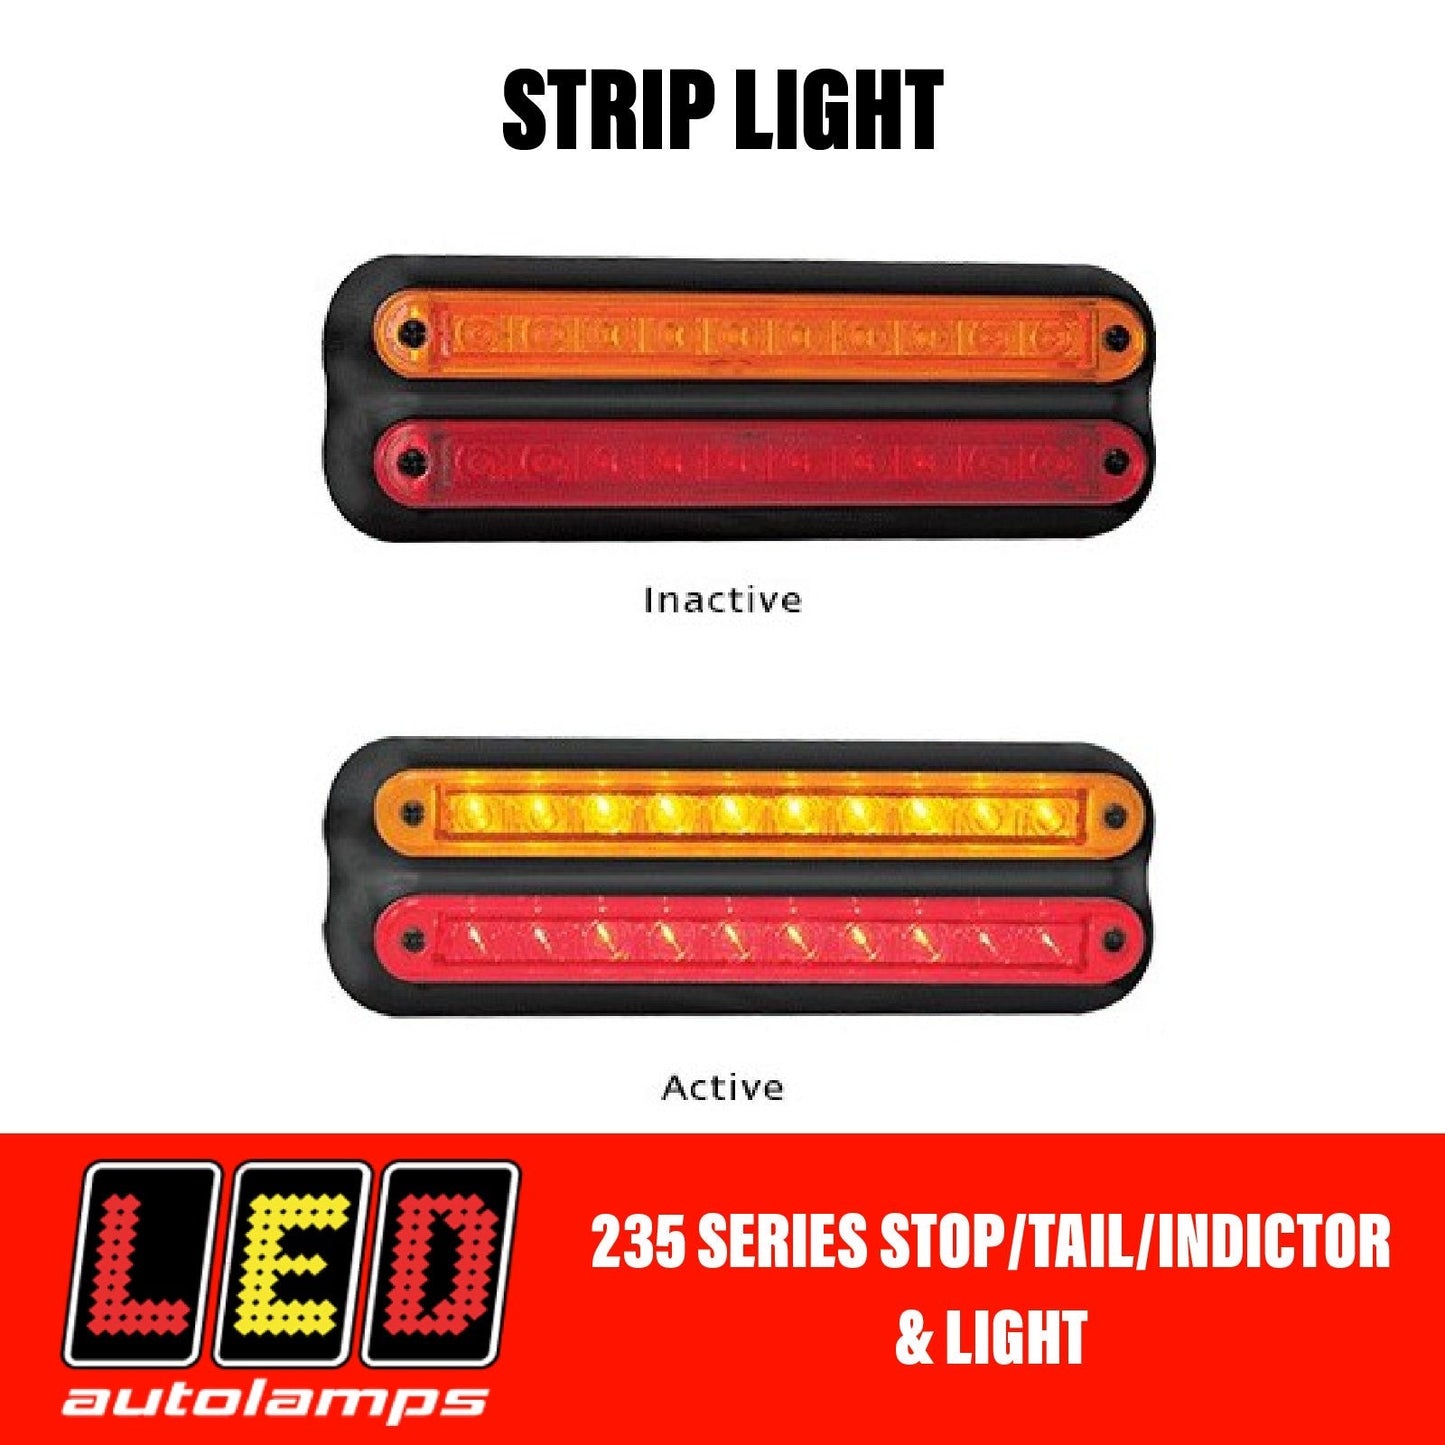 LED Autolamps 235BAR12 Stop/Tail and Indictor Strip Light